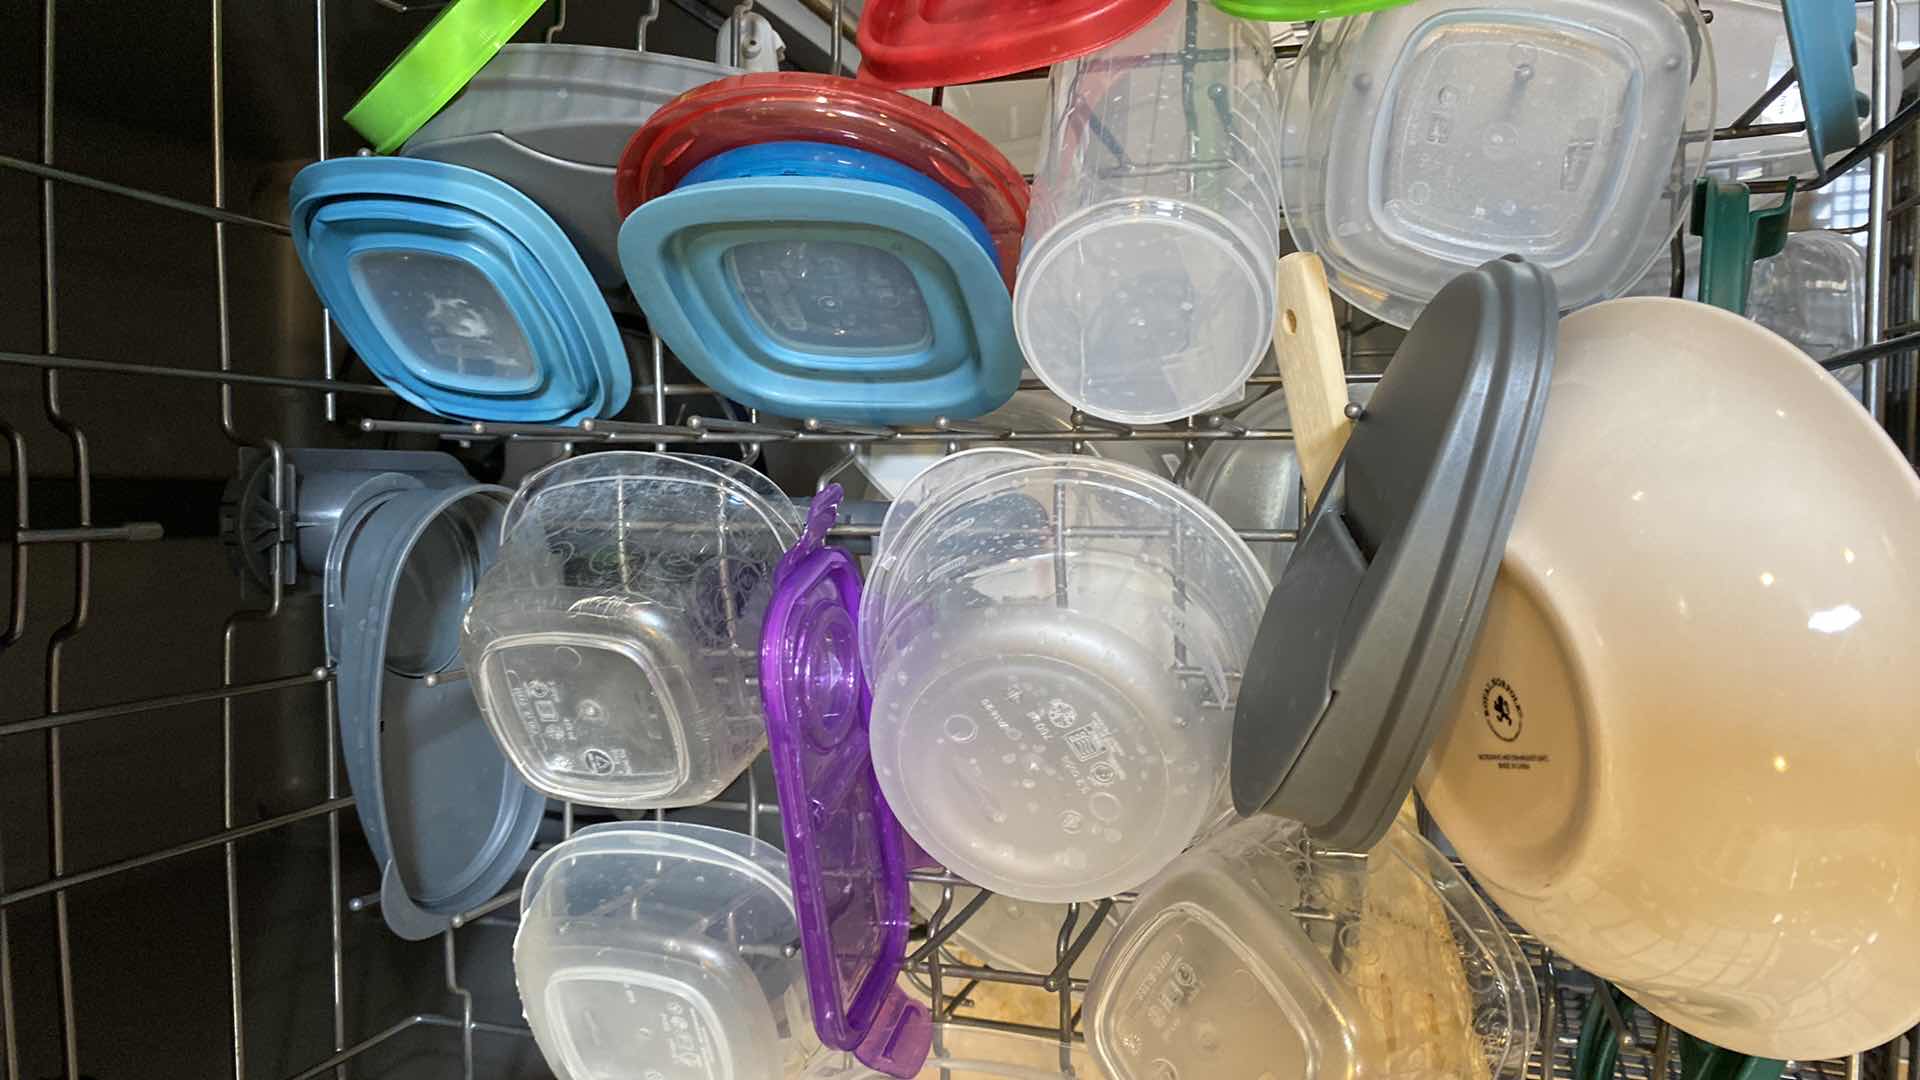 Photo 2 of CONTENTS OF DISHWASHER